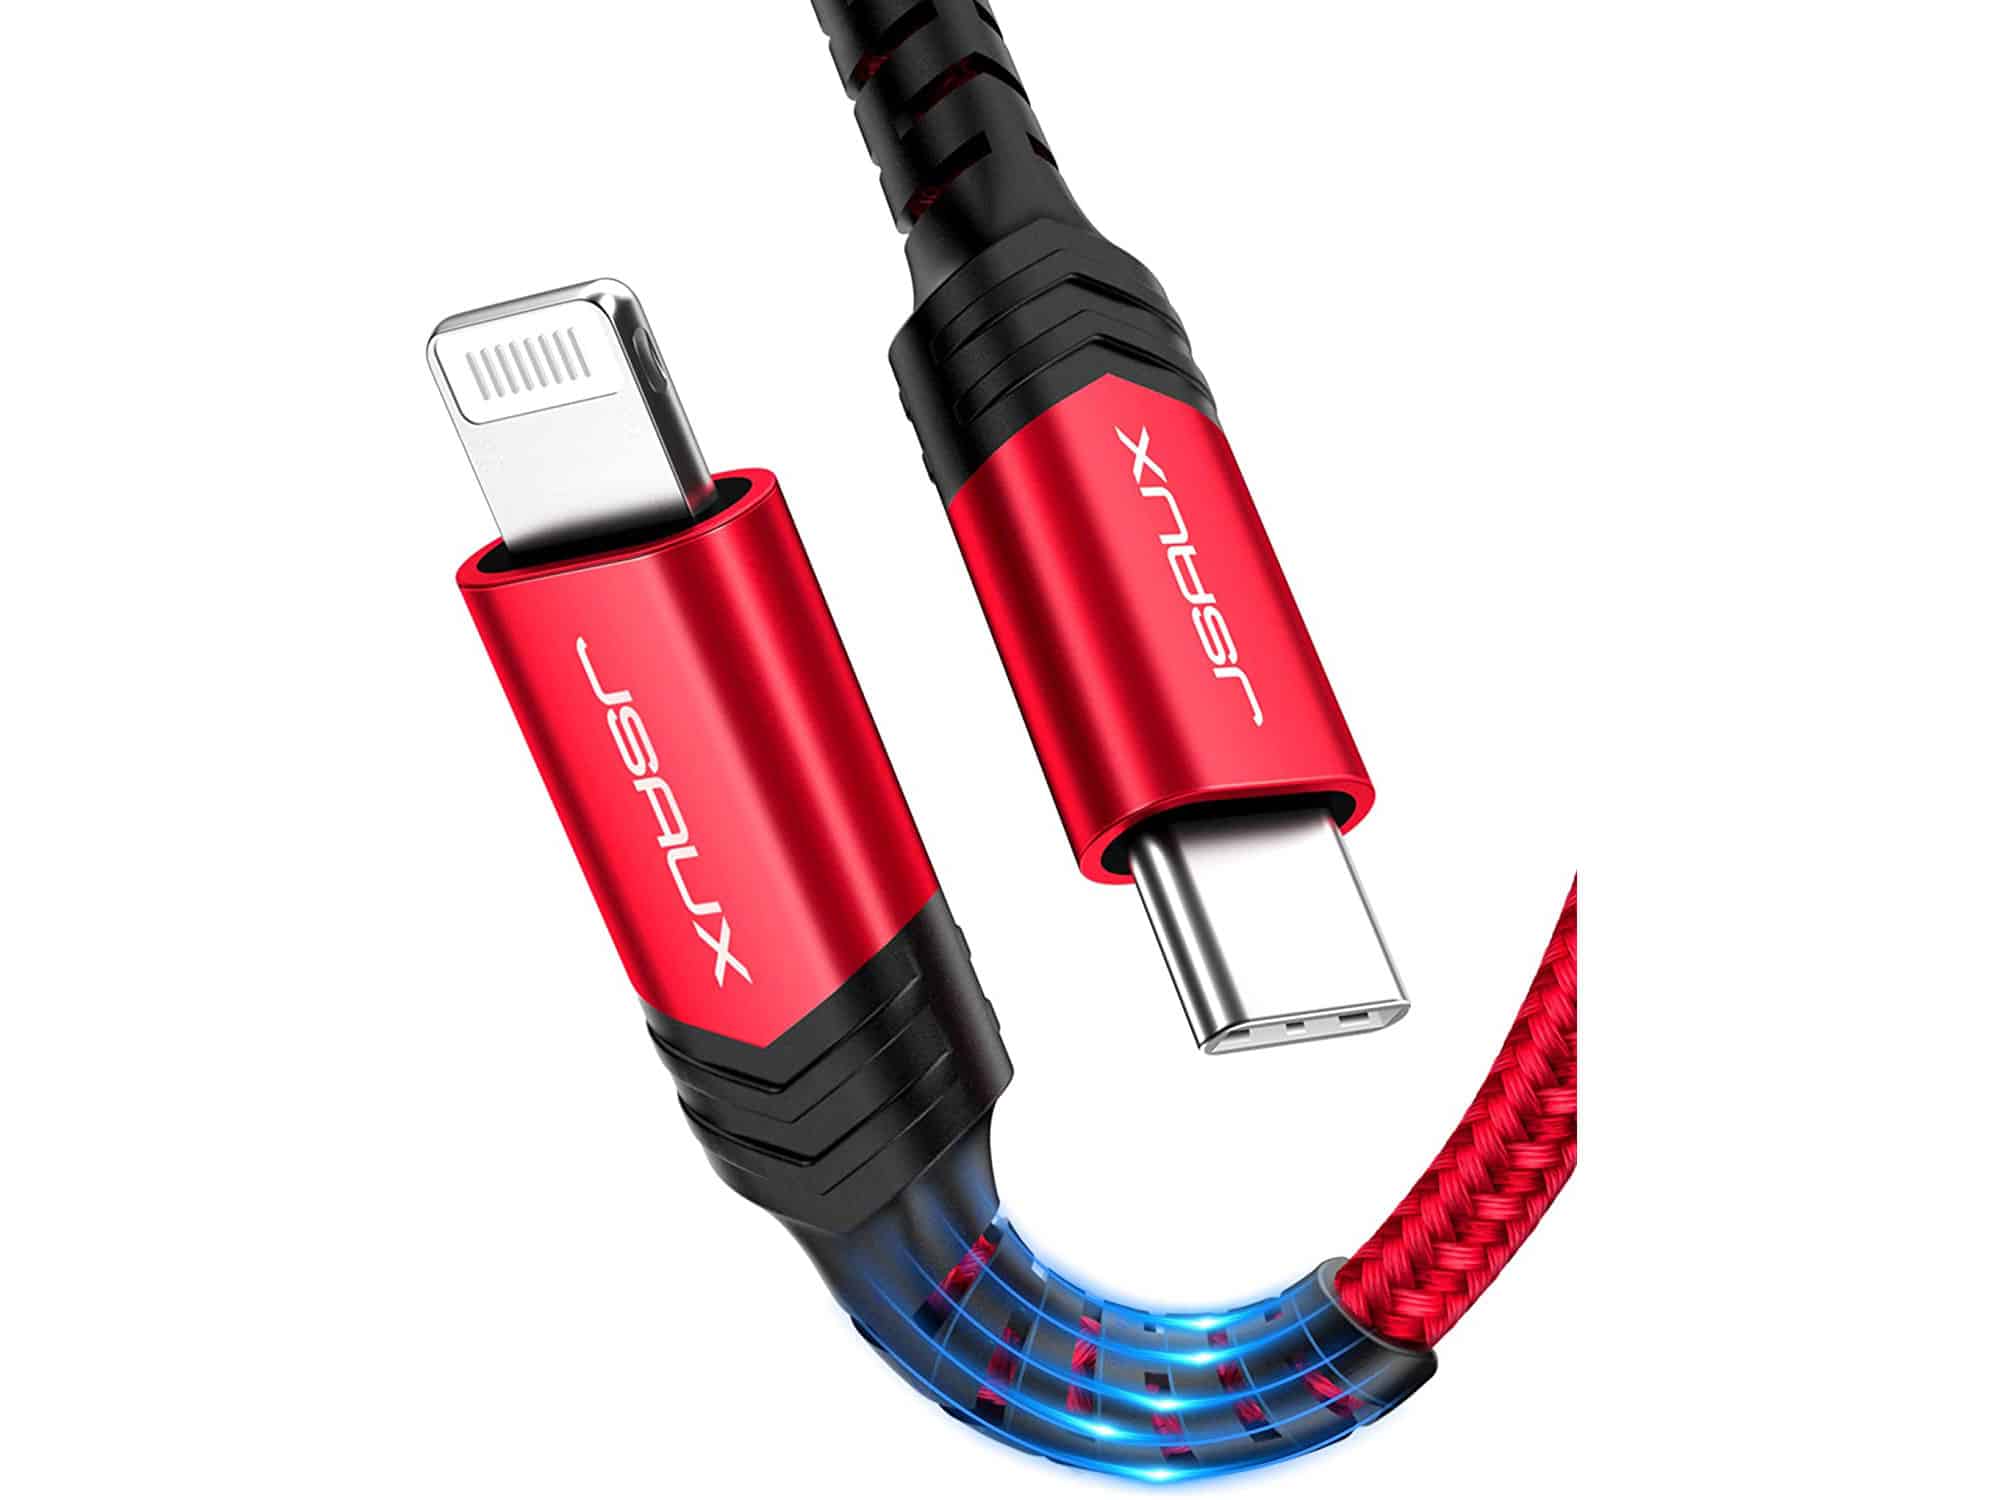 Jsaux USB C to Lightning Cable 6FT